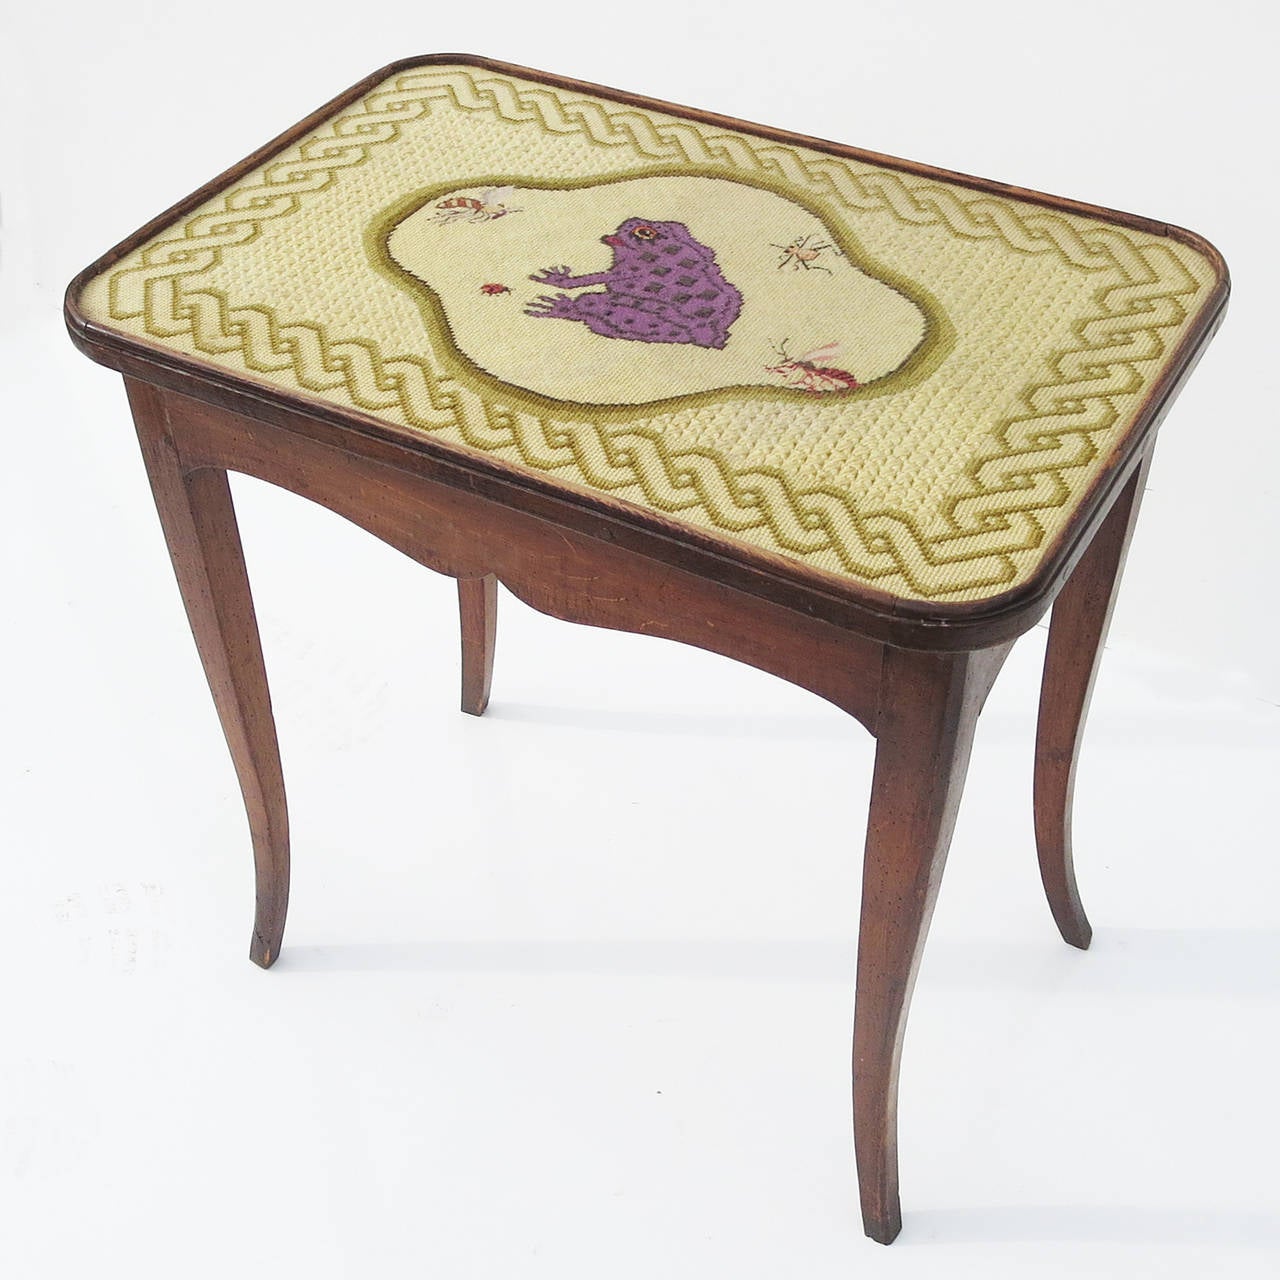 This super charming table features a needlepoint embroidered top surface of a frog and insects, executed in the highest quality. There is a clear glass top surface to protect the work. The frame is a dark stained fruitwood, with a single drawer. The